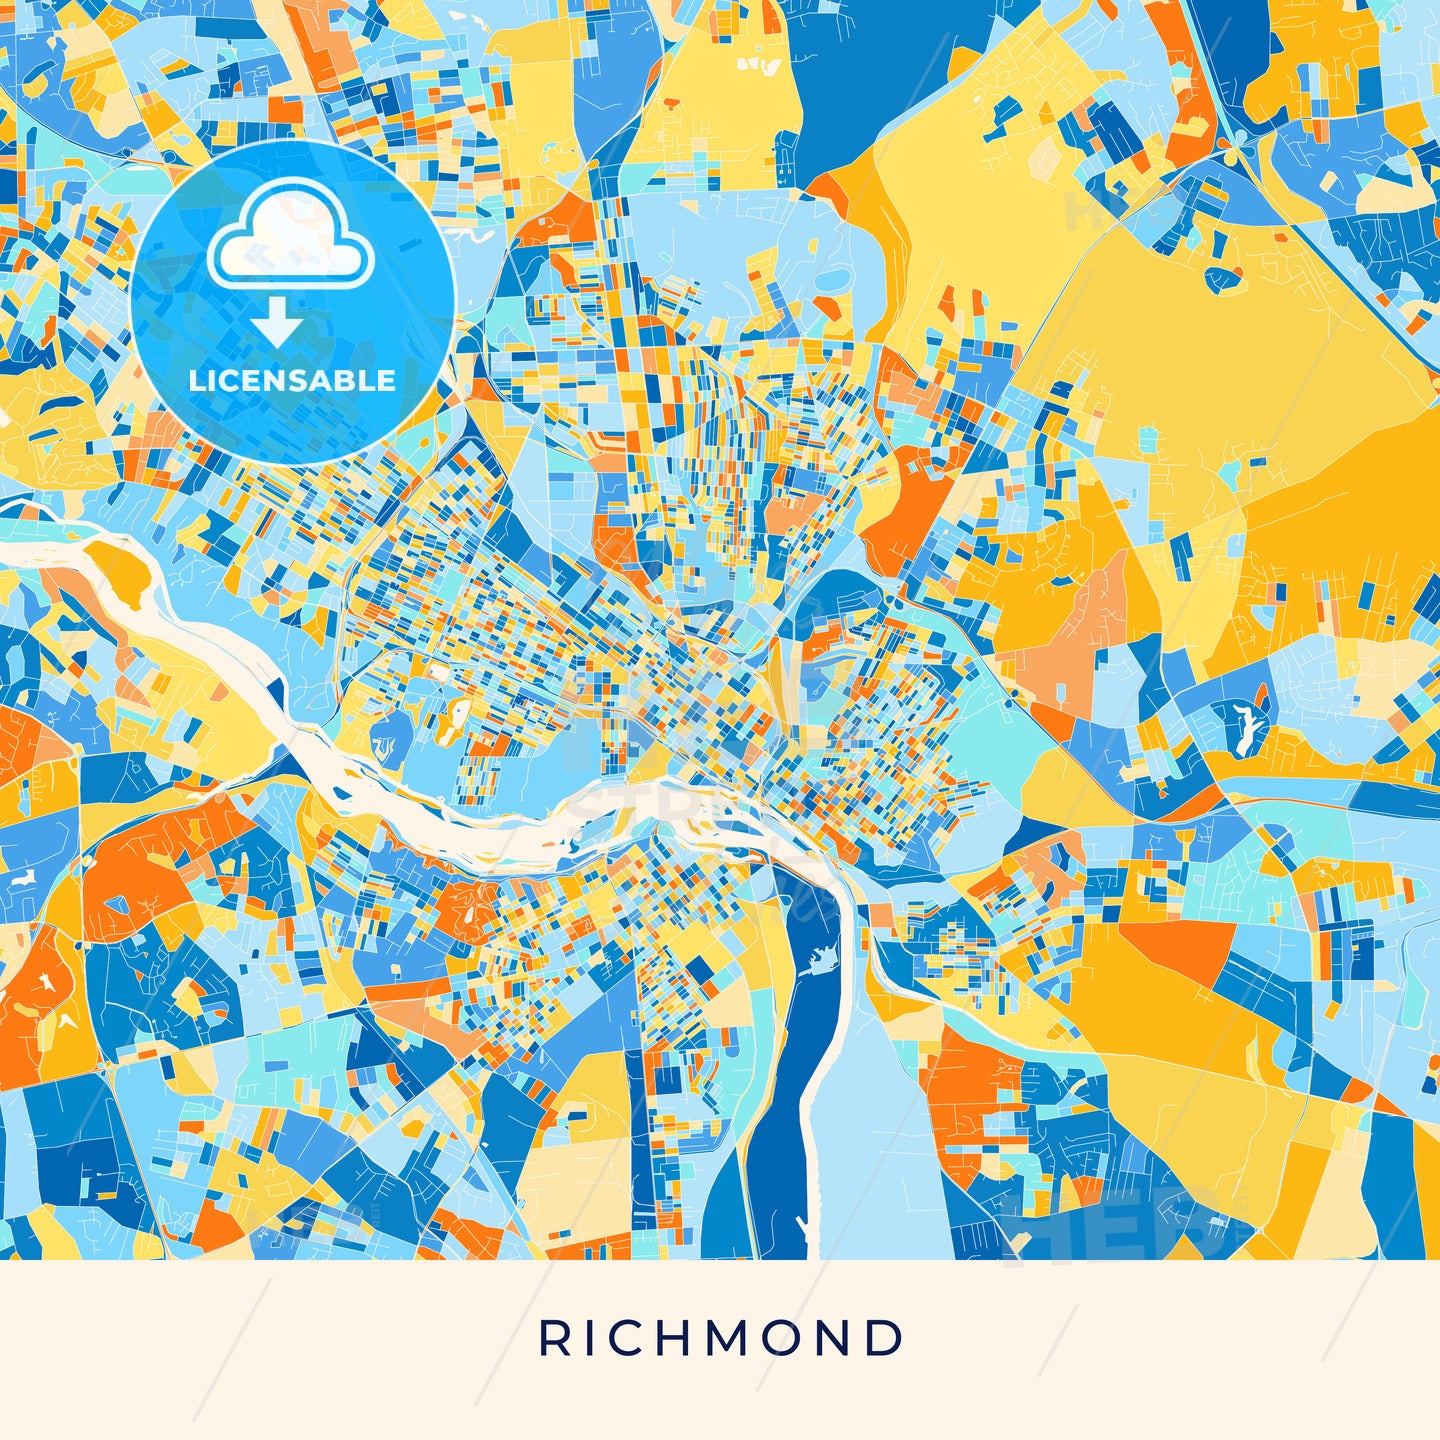 Richmond colorful map poster template